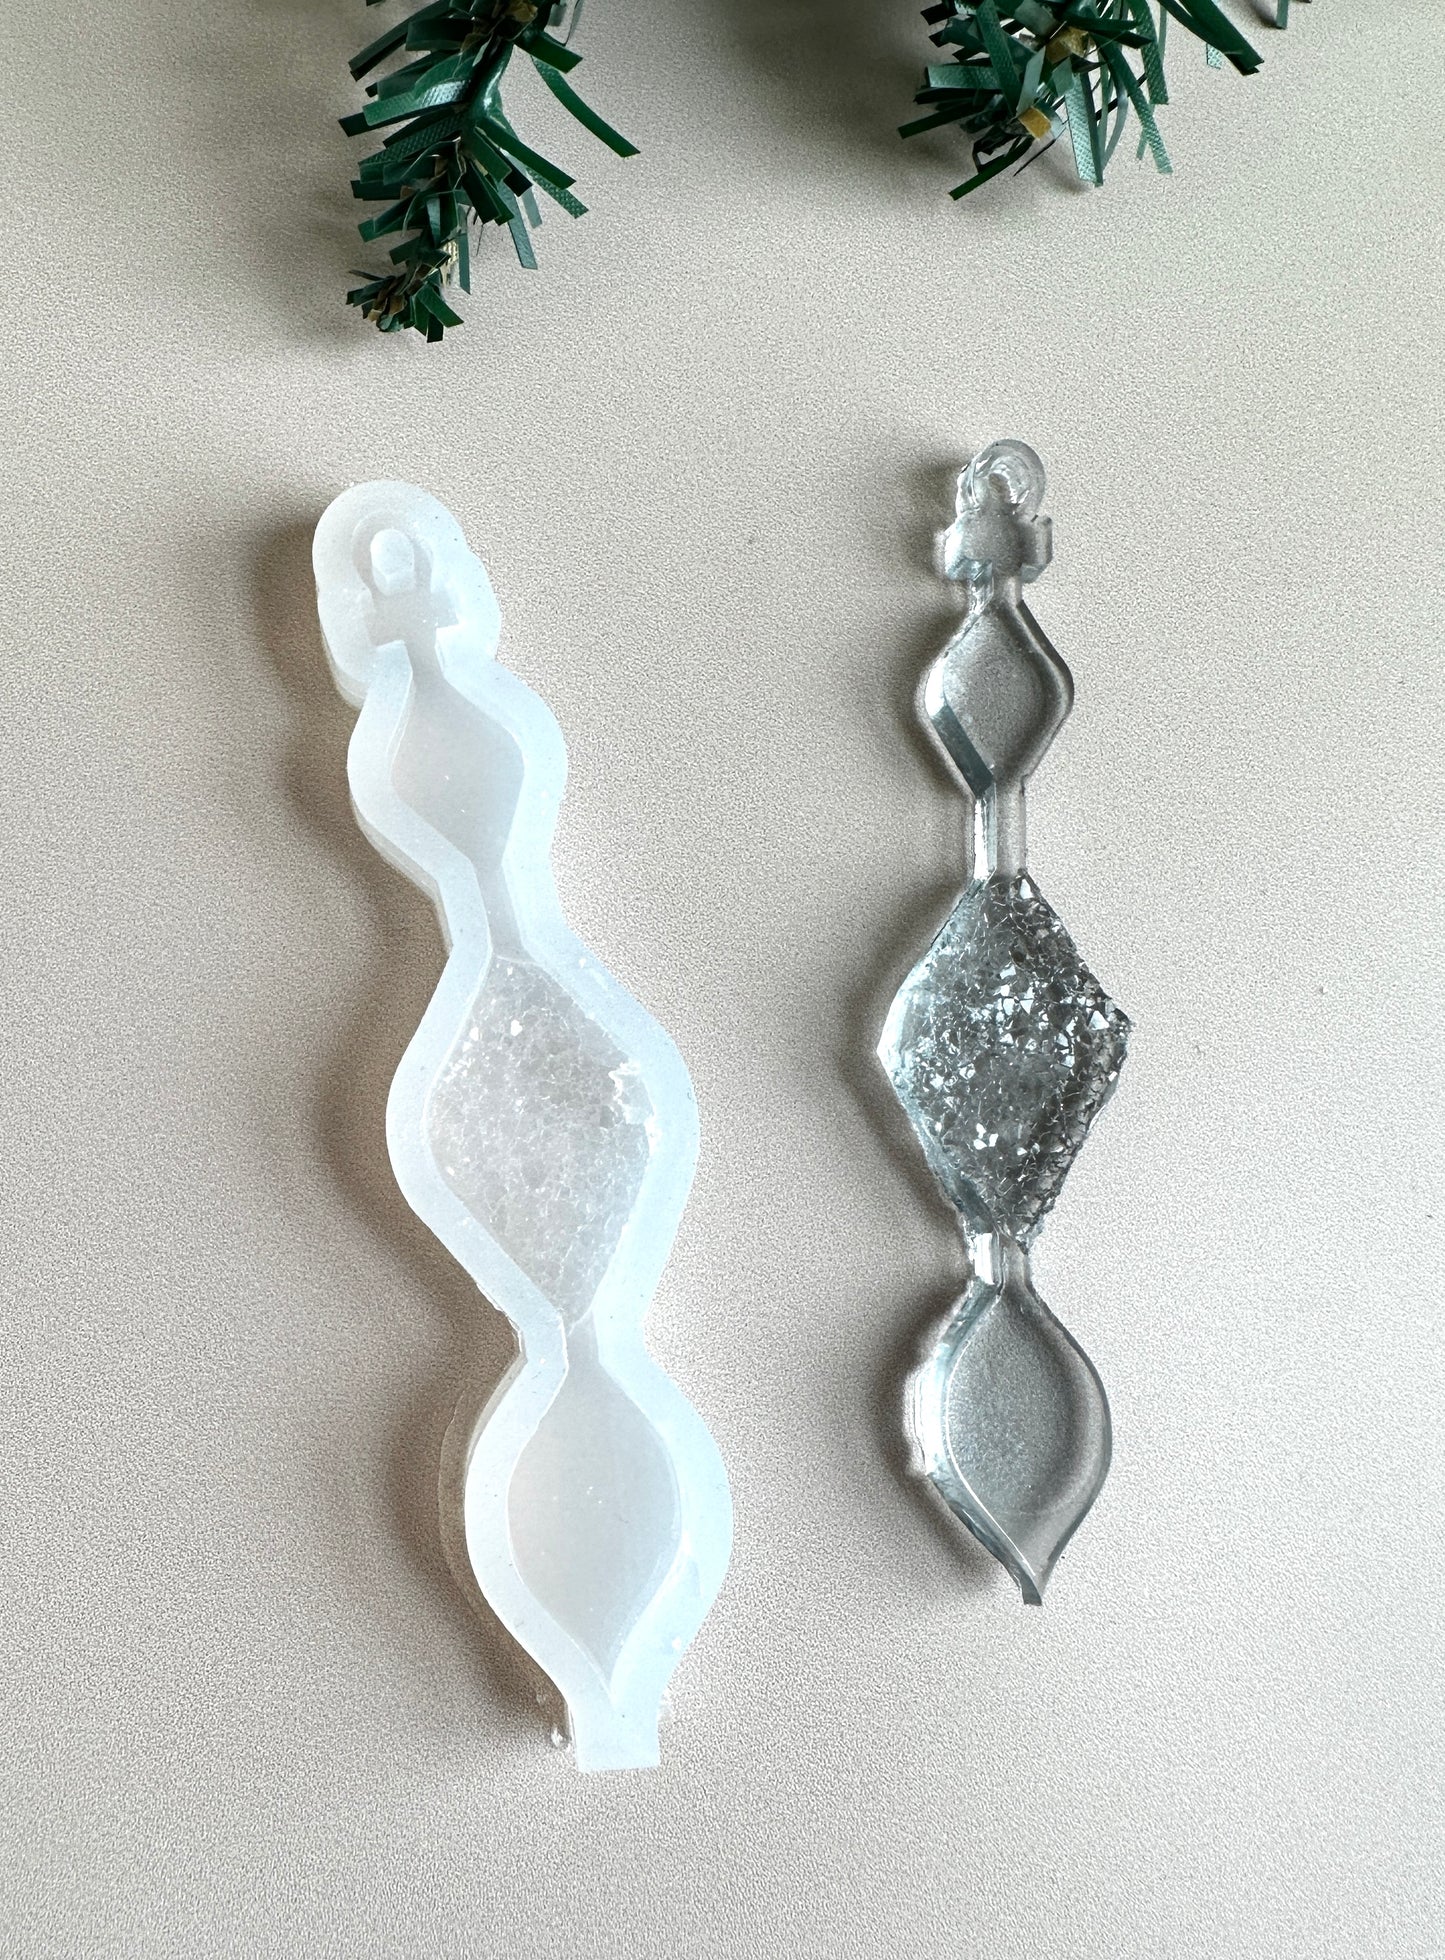 Christmas Tree Ornament with Crystals Silicone Mold - Icicle Shaped Molds for Resin Crafting - Perfect DIY Holiday Decor Gift